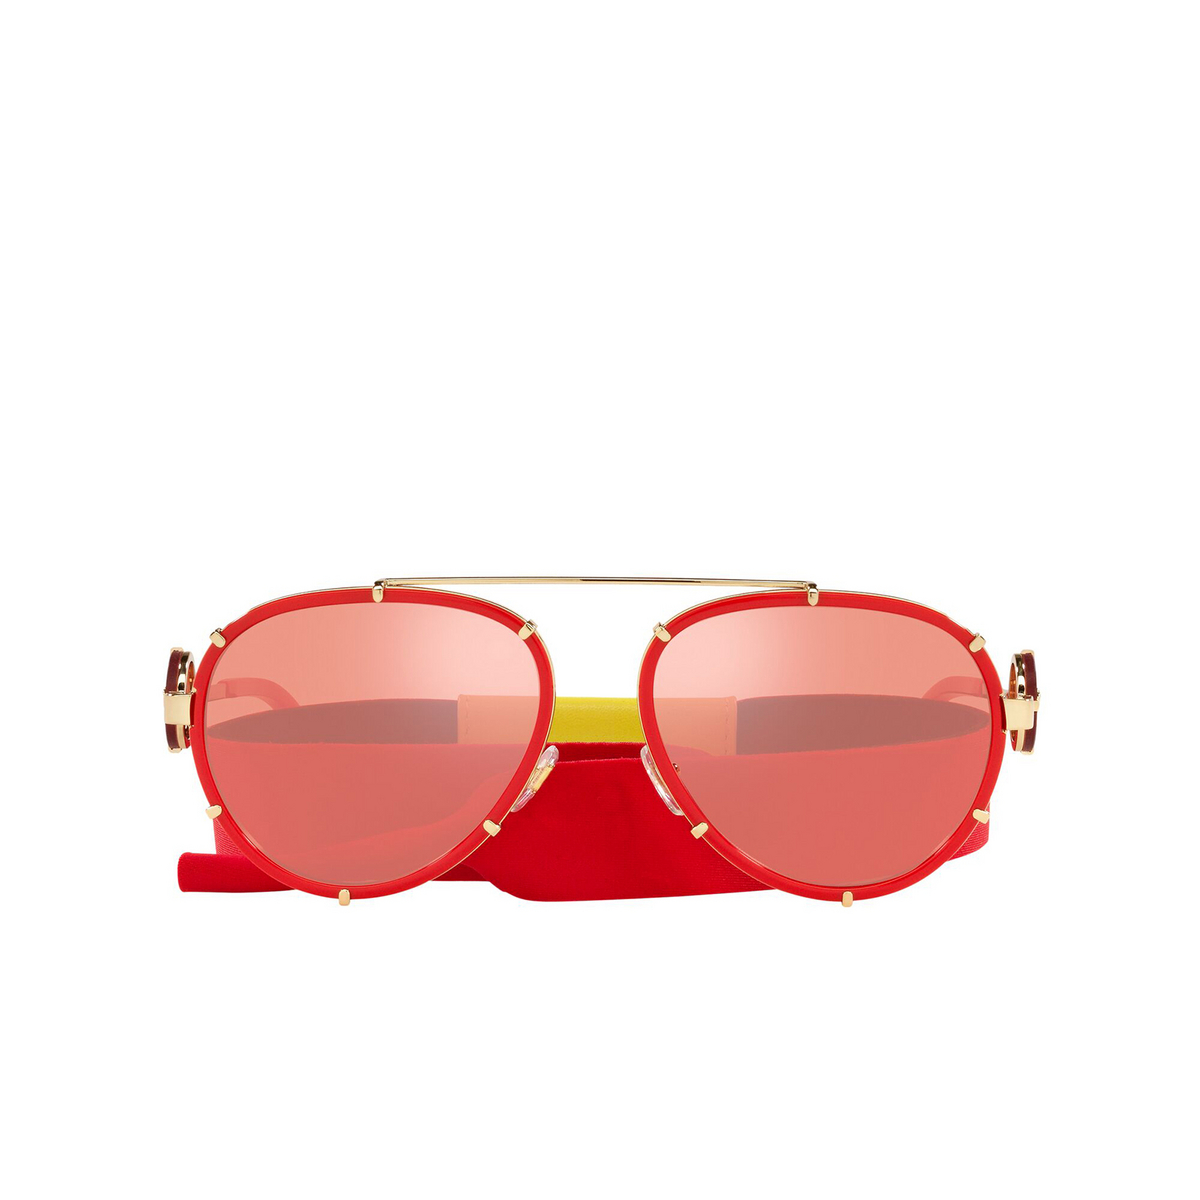 Versace® Aviator Sunglasses: VE2232 color Red 1472C8 - front view.